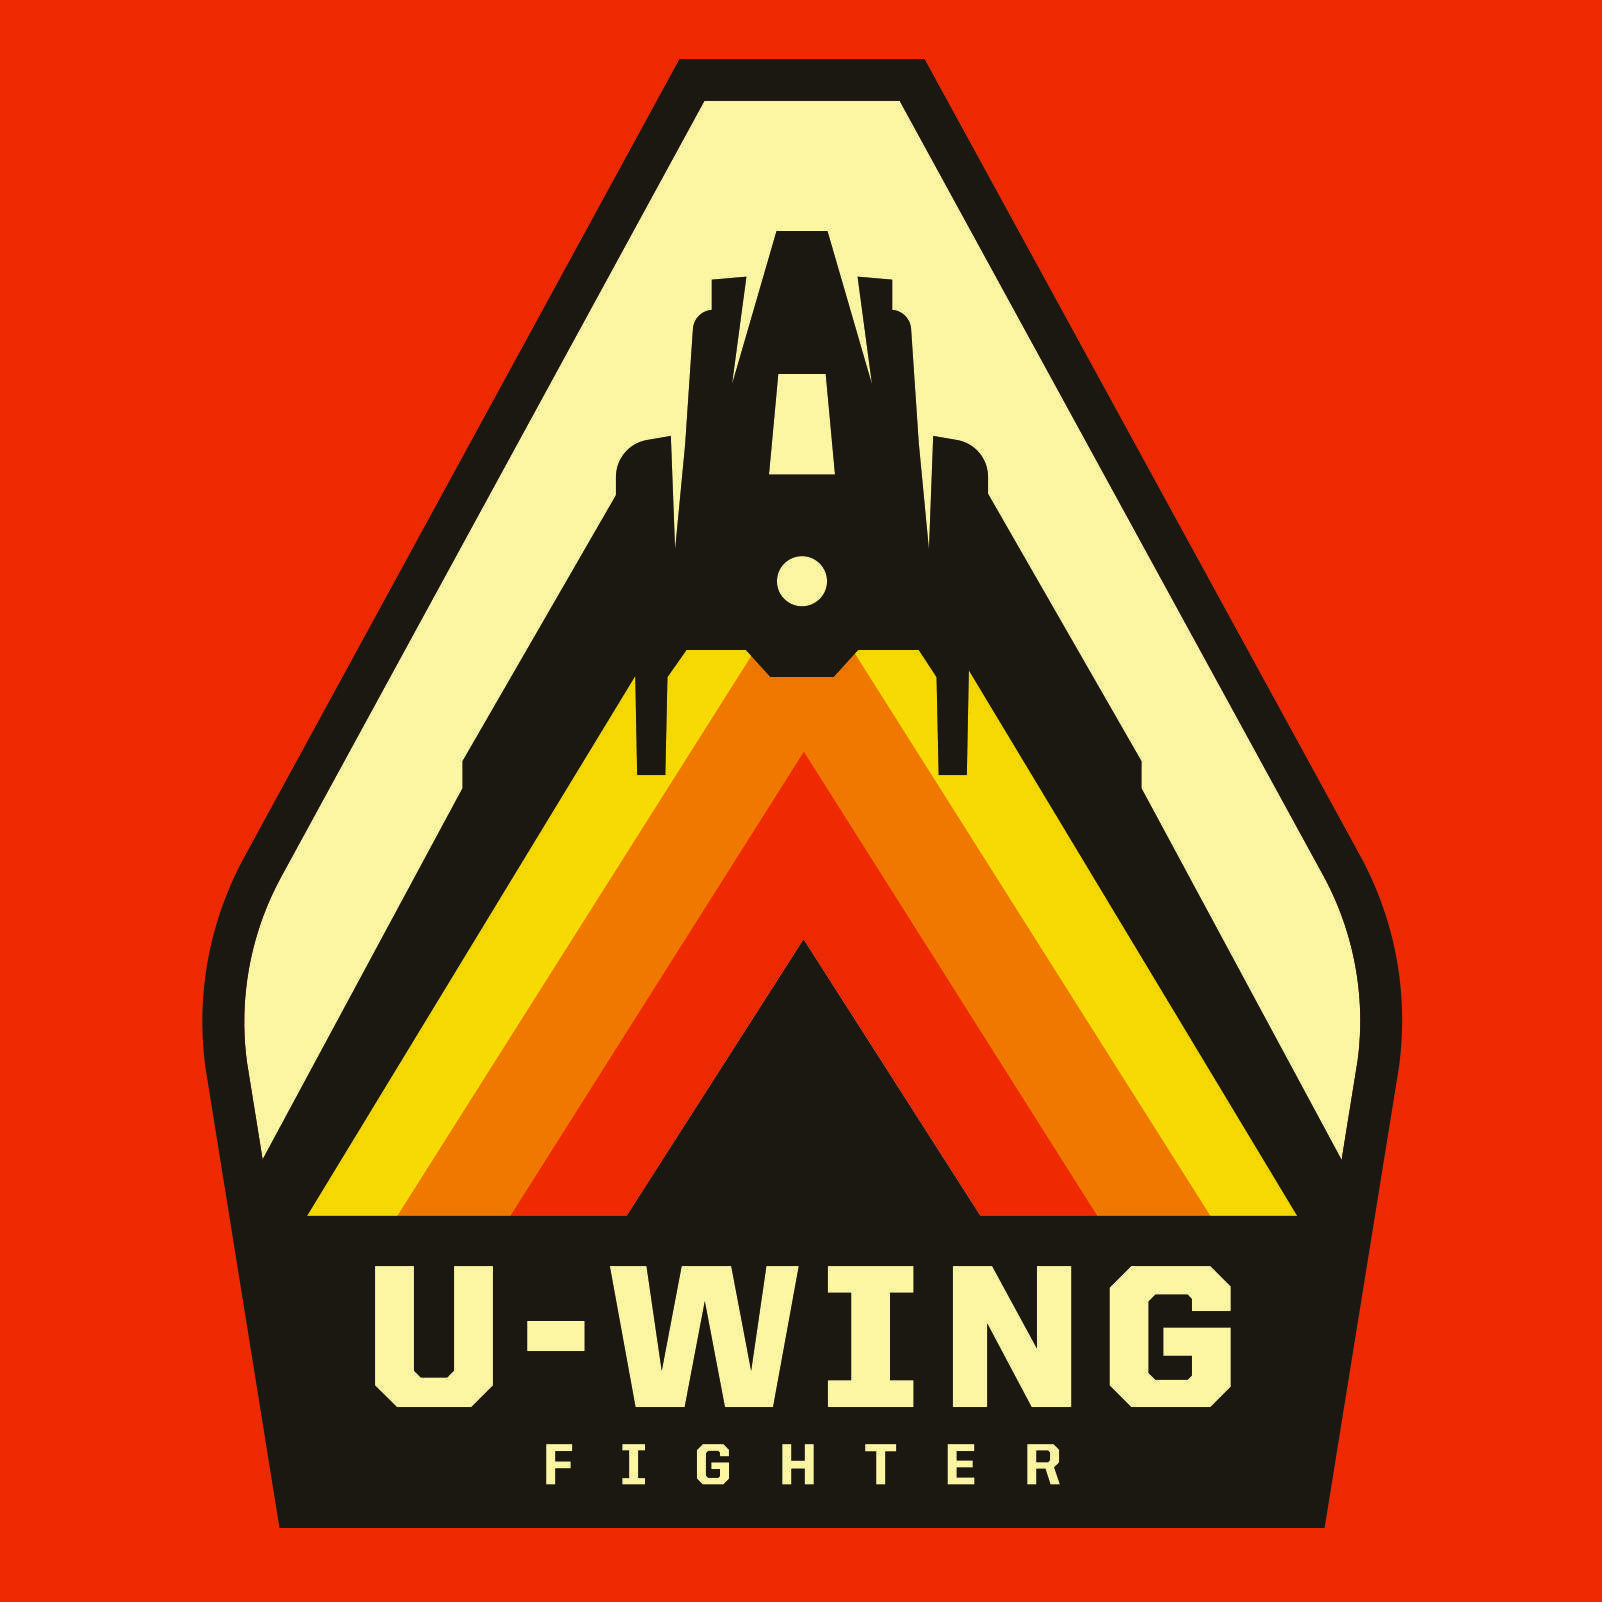 U Wing Logo - Star Wars Rogue one art. U-Wing in a retro design from Rogue One. Re ...